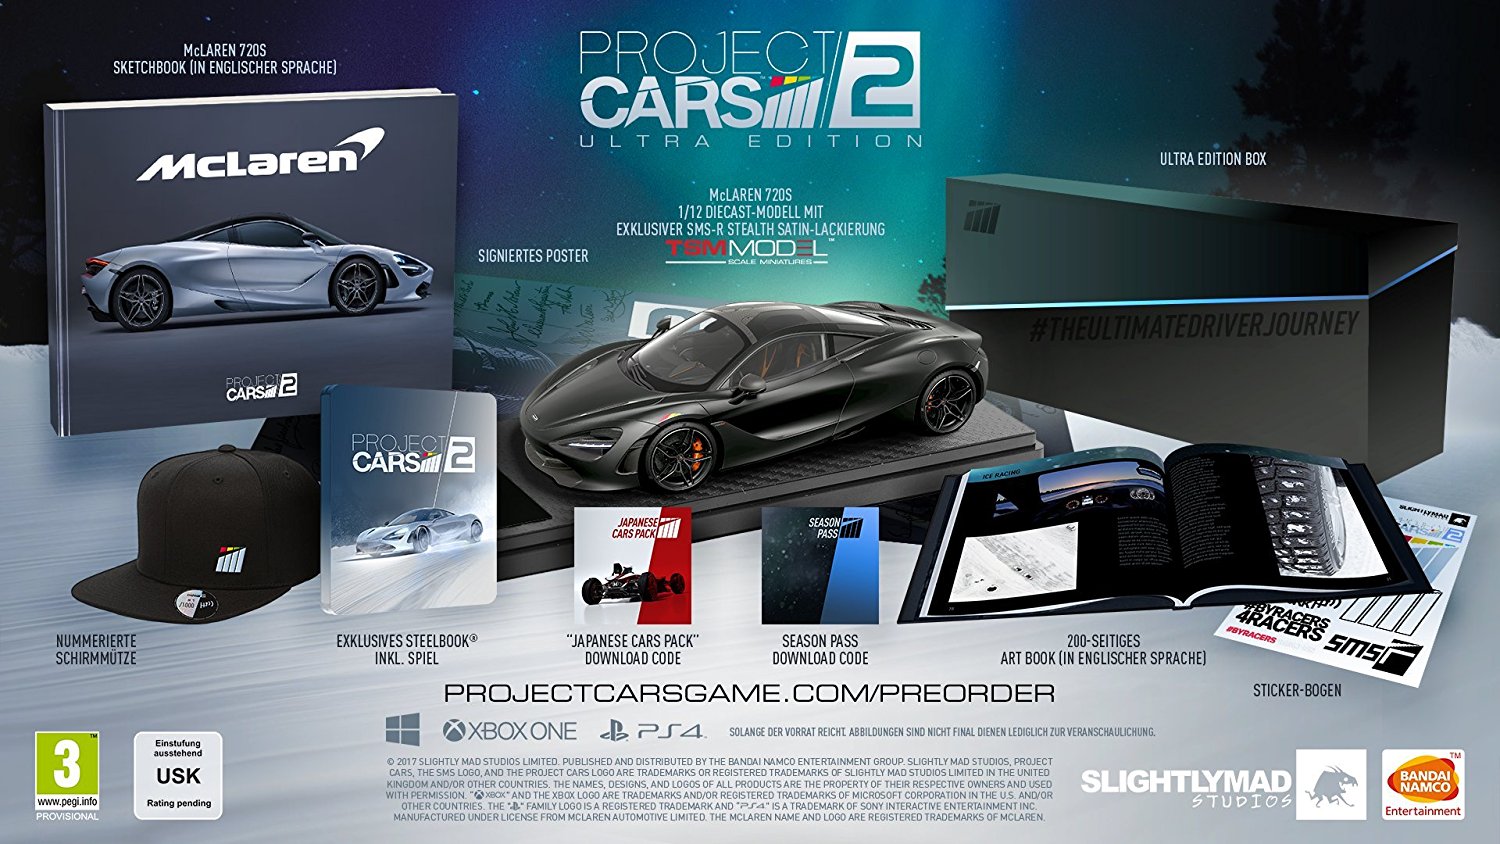 Project CARS 2 Ultra Edition